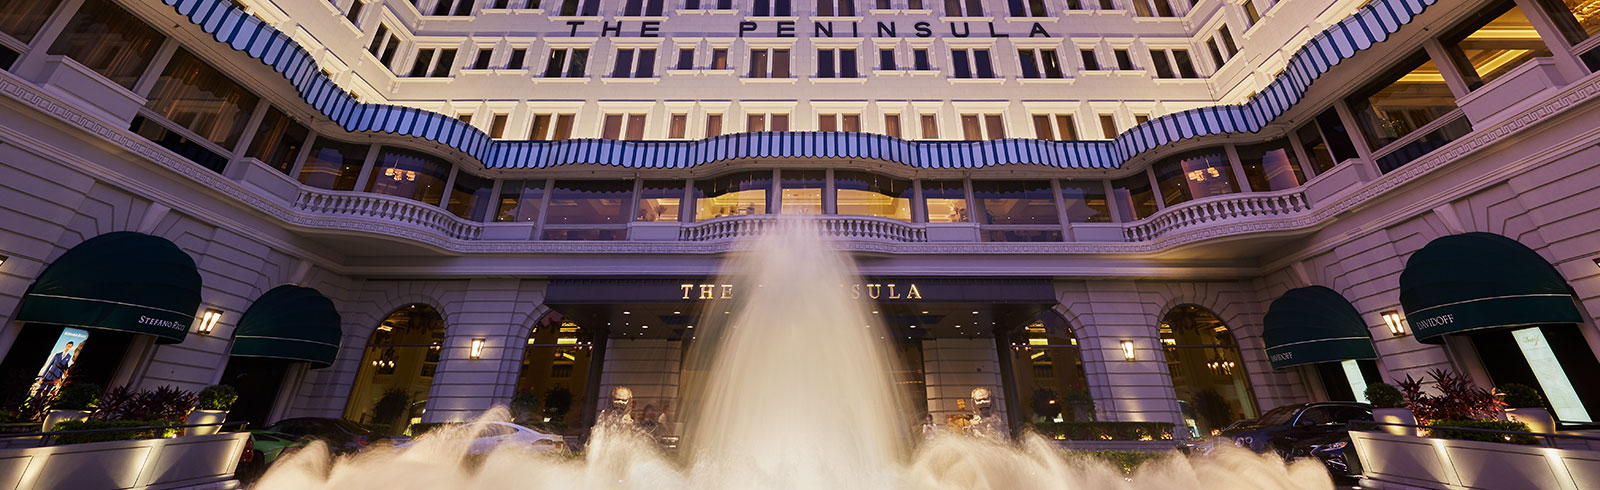 The Peninsula Hotel Front View, used for promote SC Credit Card Promotion offer with Peninsula Hotel